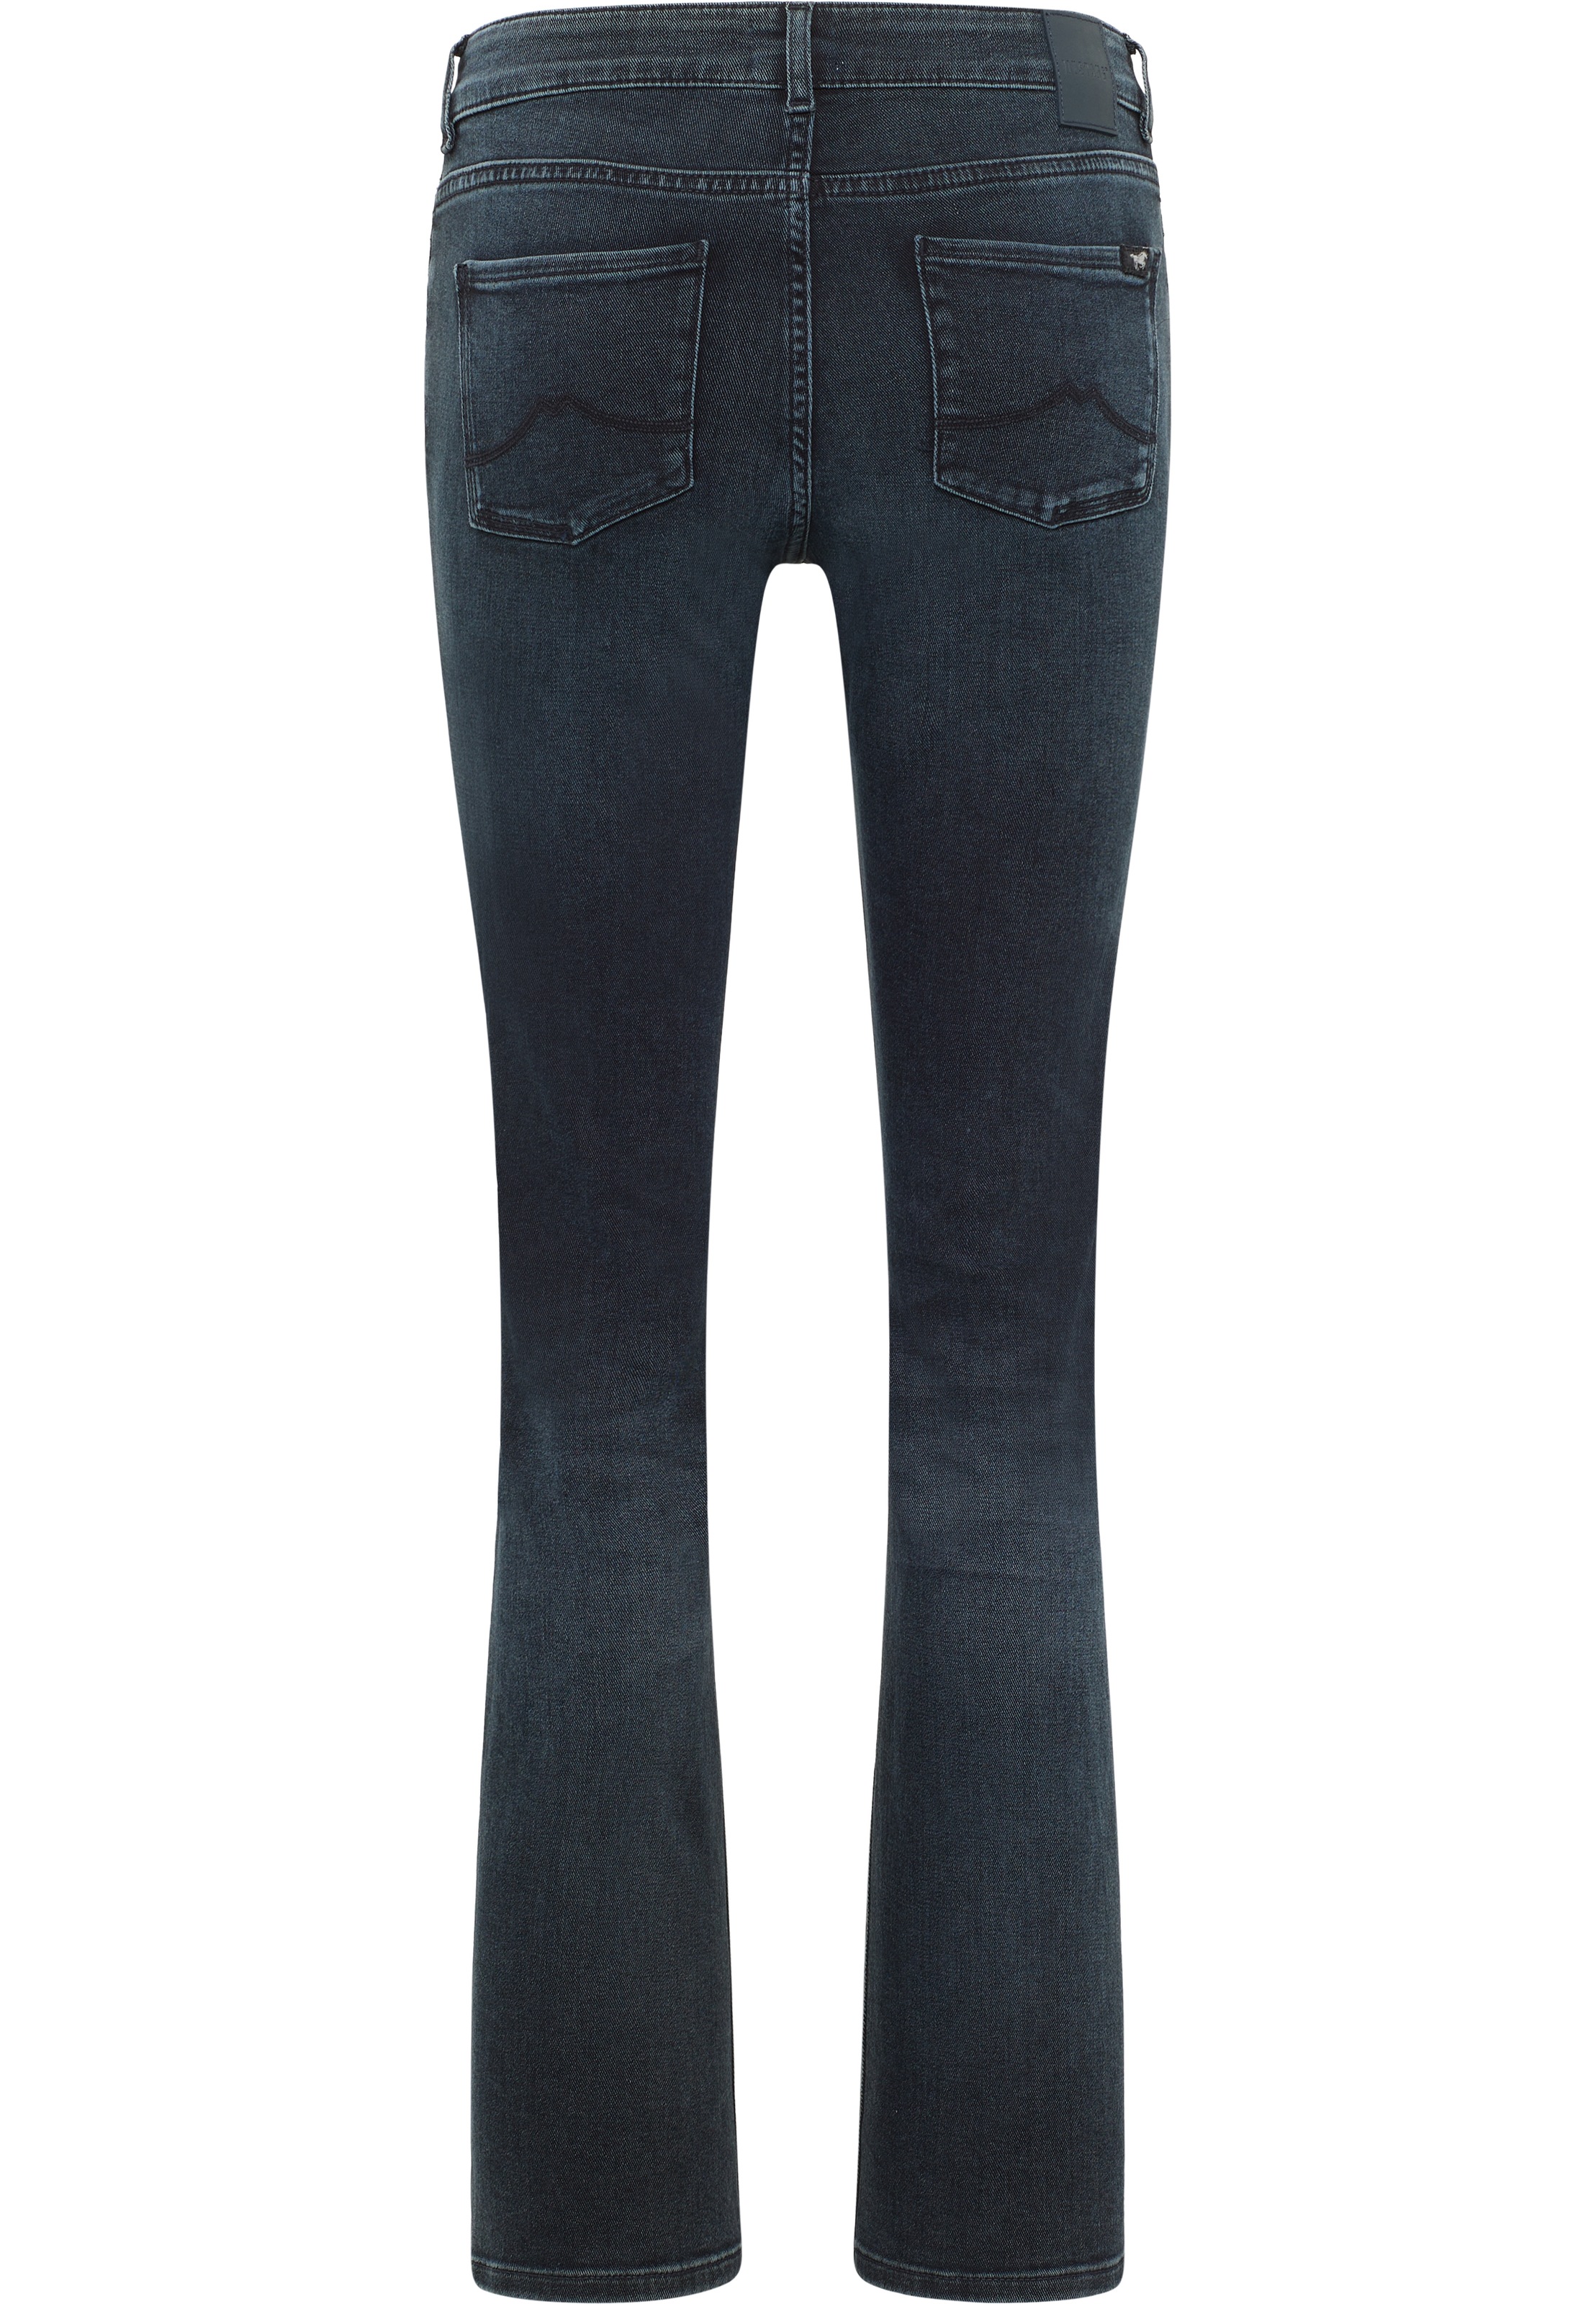 MUSTANG Straight-Jeans »Style Crosby Relaxed OTTO Shop kaufen im Online Straight«